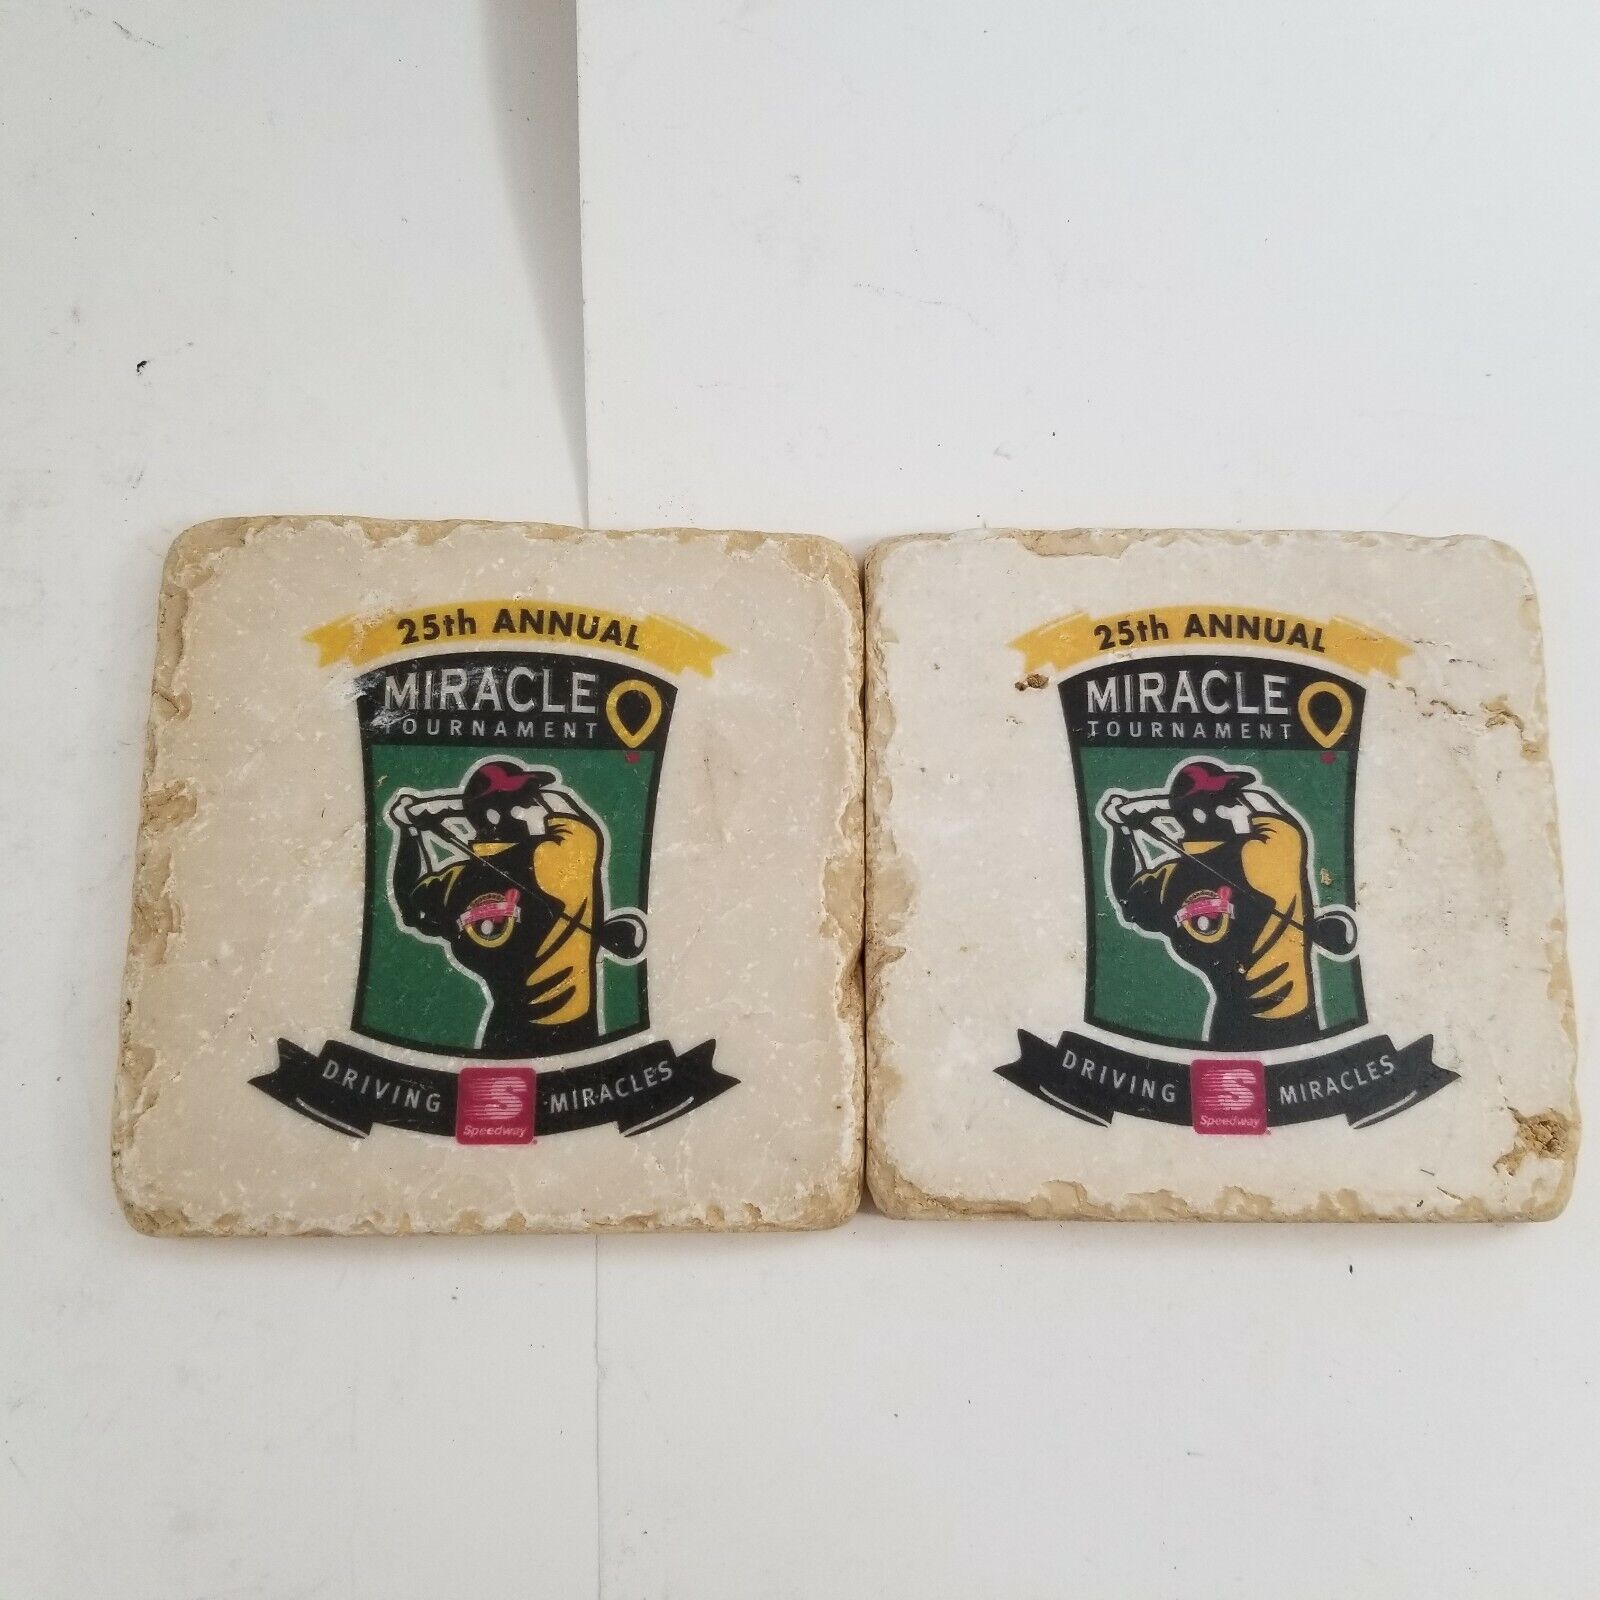 Set of 2 Miracle Golf Tournament Coasters 25th Annual Driving Miracles Speedway